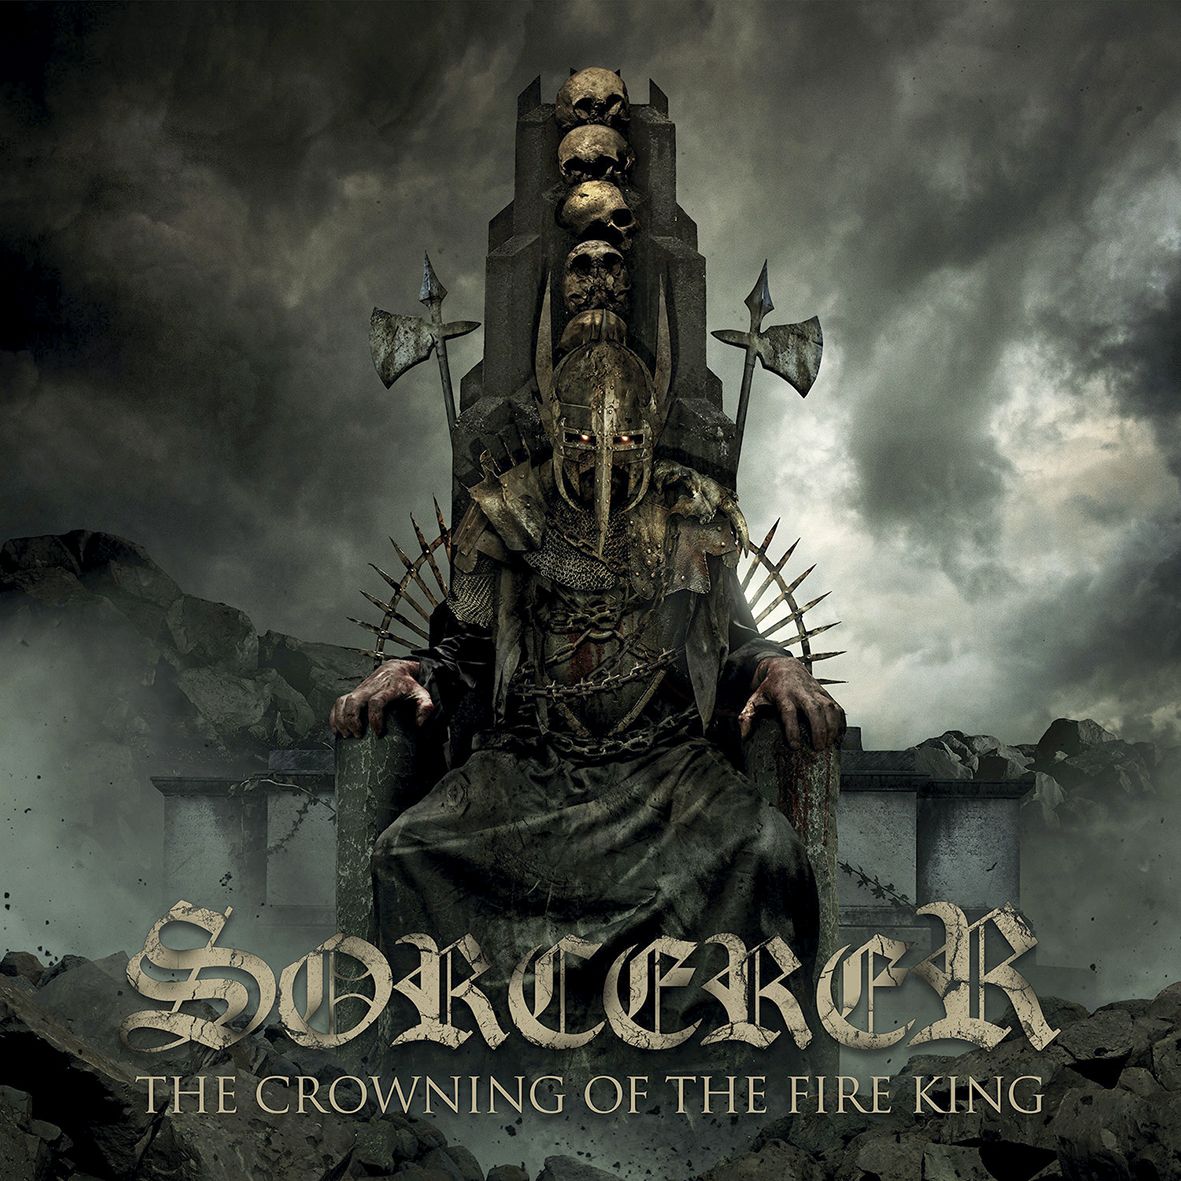 Sorcerer - The Crowning Of The Fire King